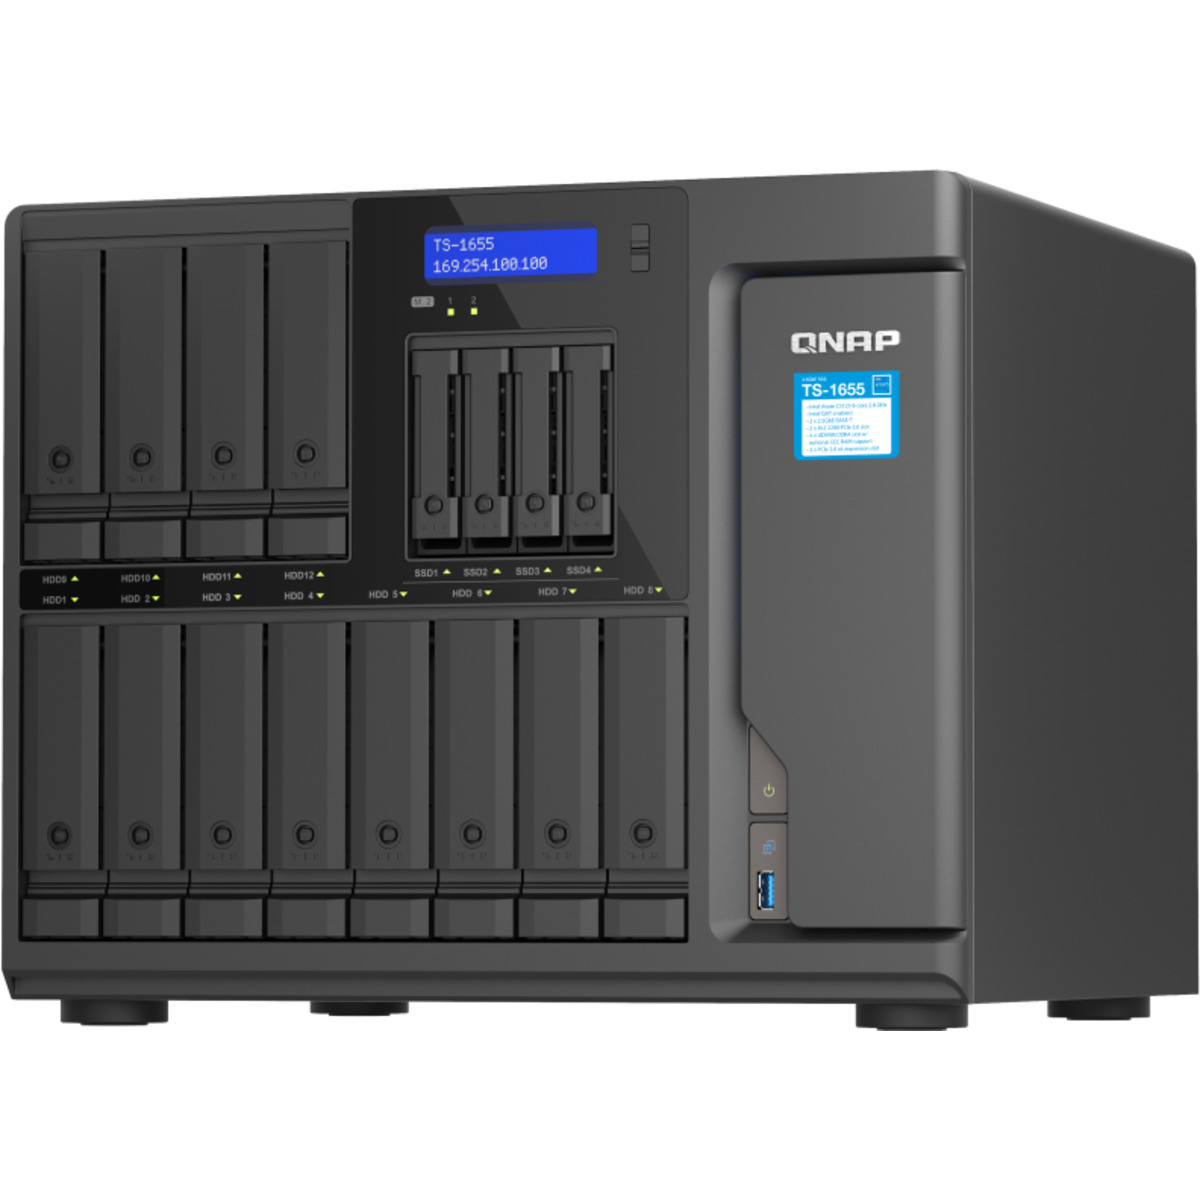 QNAP TS-1655 154tb 12+4-Bay Desktop Multimedia / Power User / Business NAS - Network Attached Storage Device 7x22tb Western Digital Ultrastar HC580 SED WUH722422ALE6L1 3.5 7200rpm SATA 6Gb/s HDD ENTERPRISE Class Drives Installed - Burn-In Tested - FREE RAM UPGRADE TS-1655